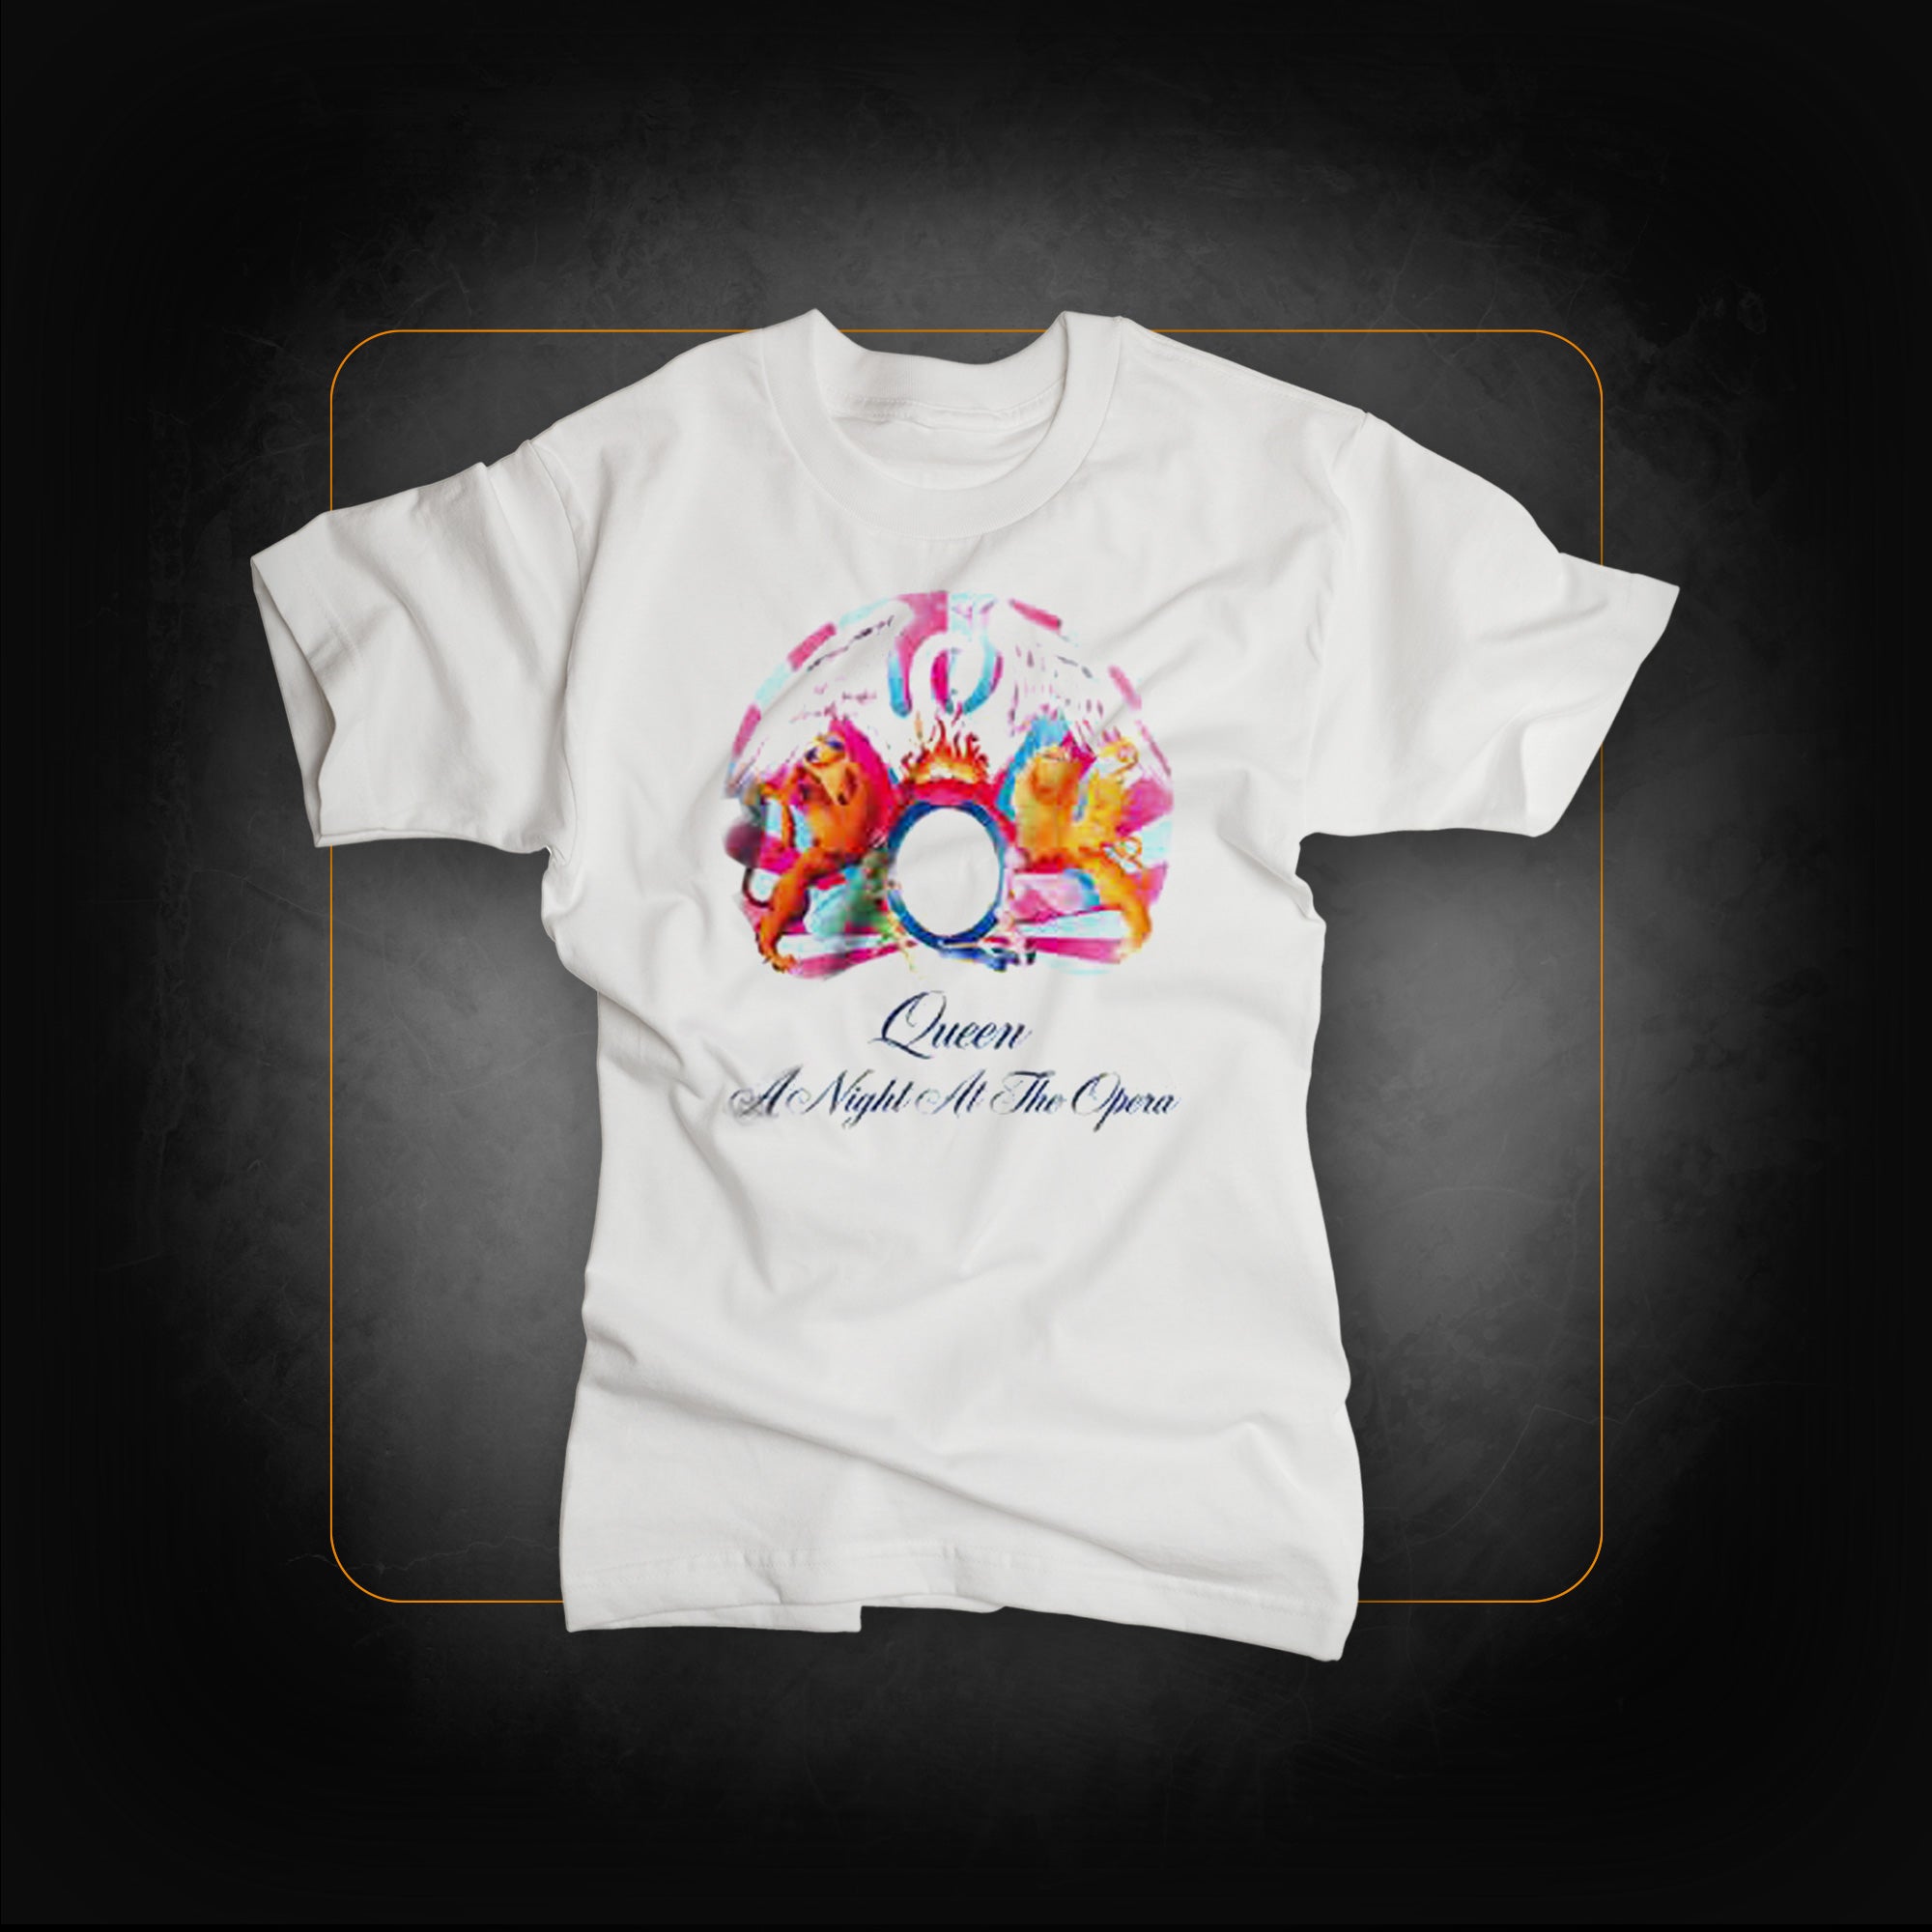 T-Shirt: A Night At The Opera - Queen